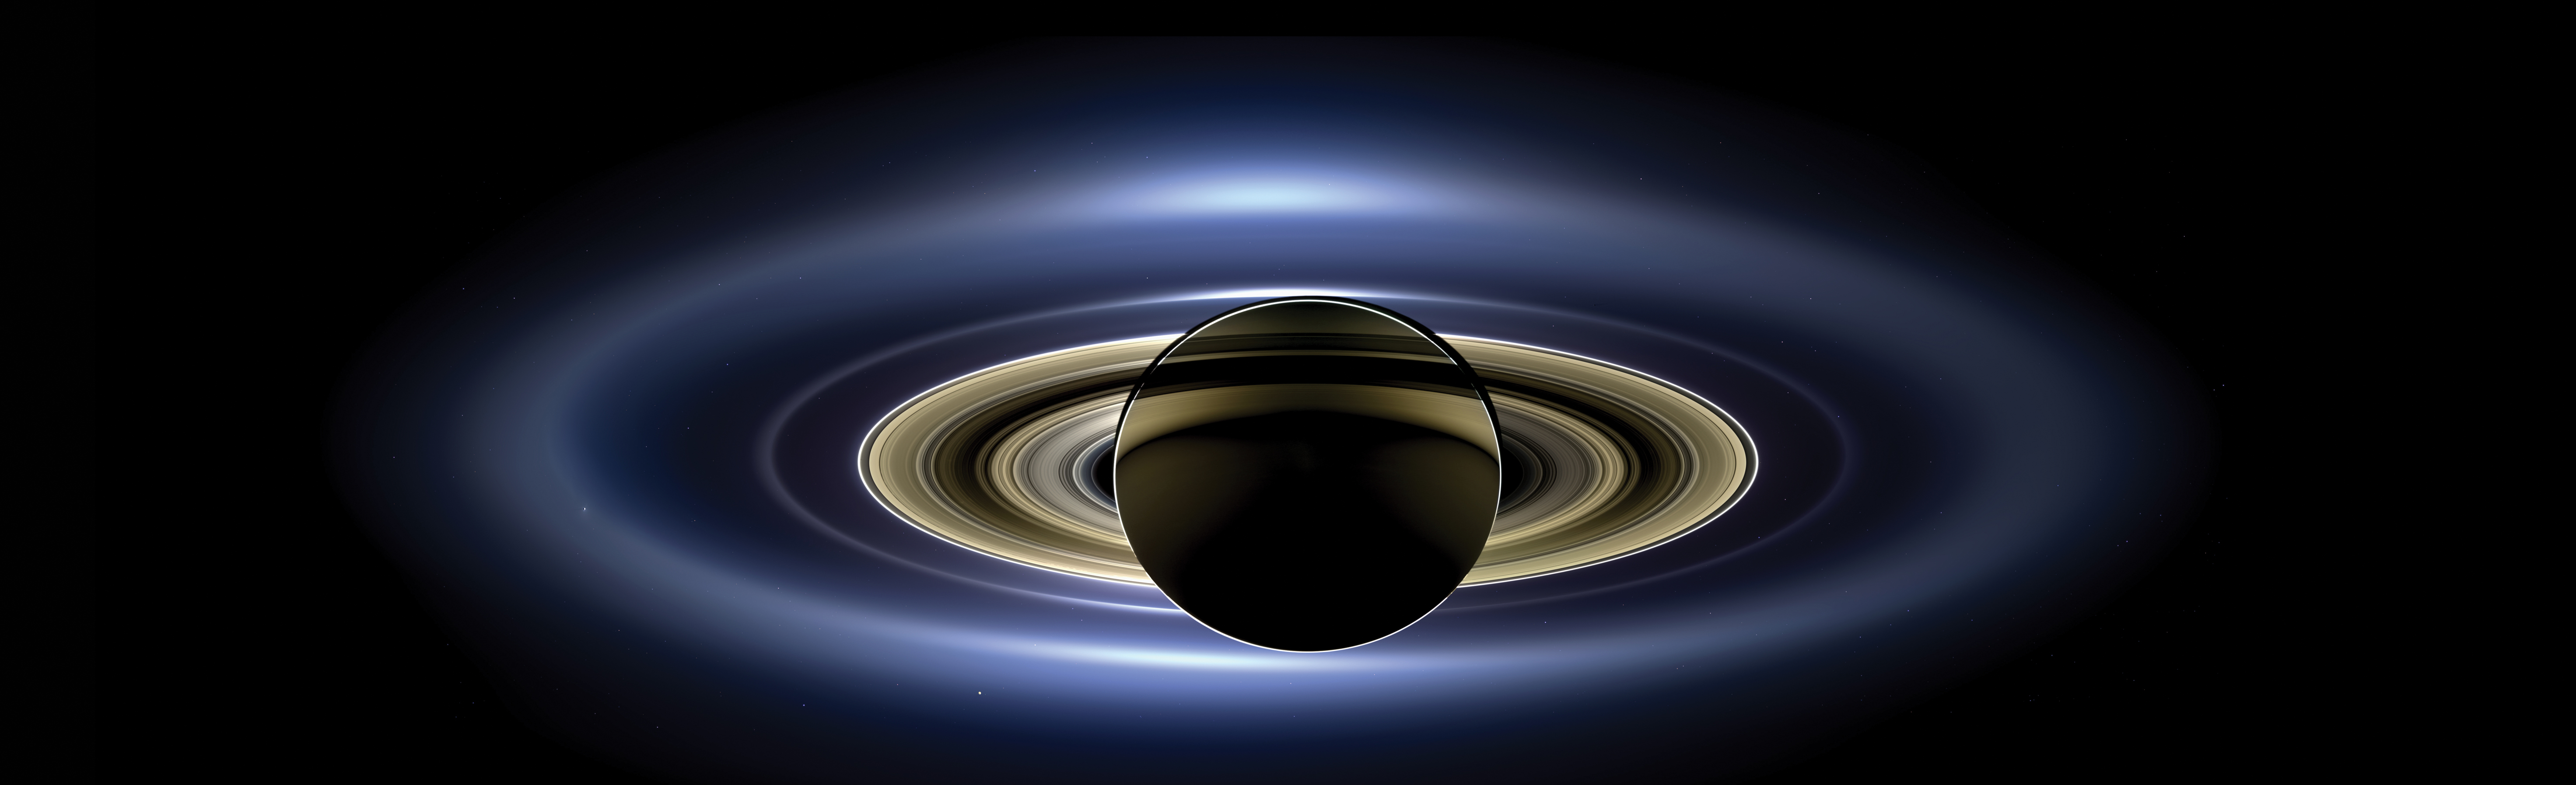 Saturn eclipsing Sun from Cassini wide-angled camera.